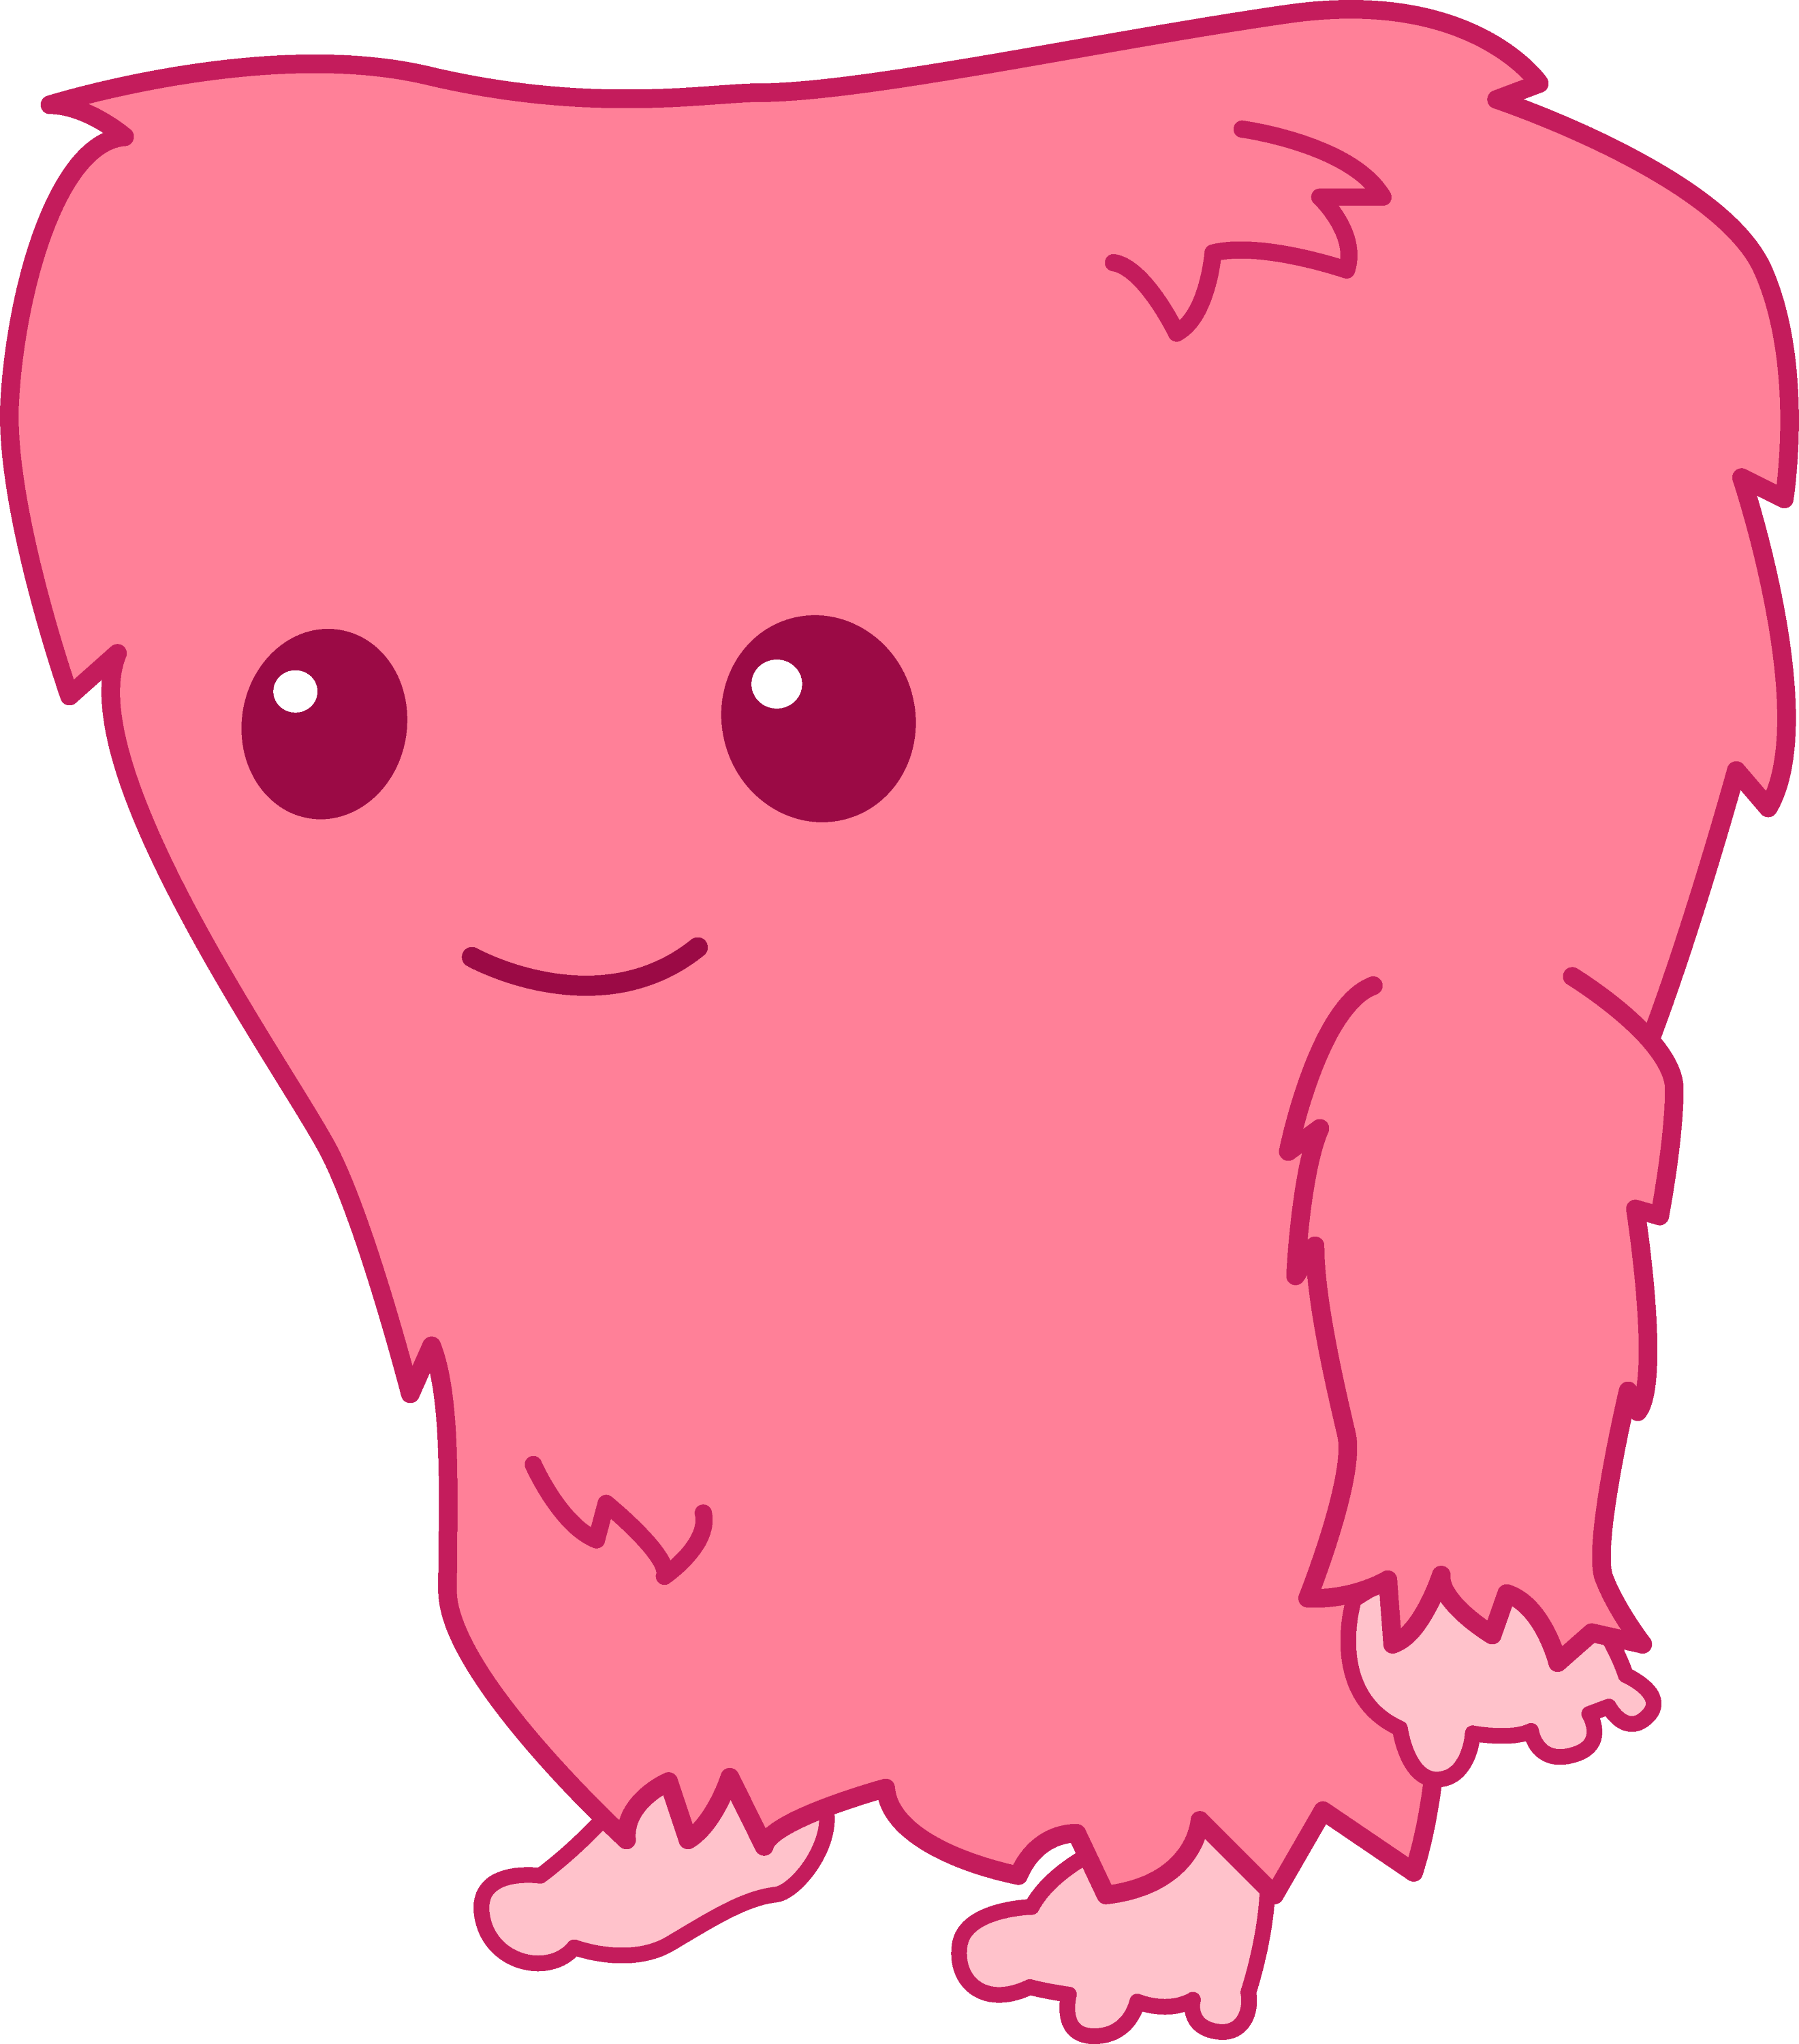 monster_cute_pink.png